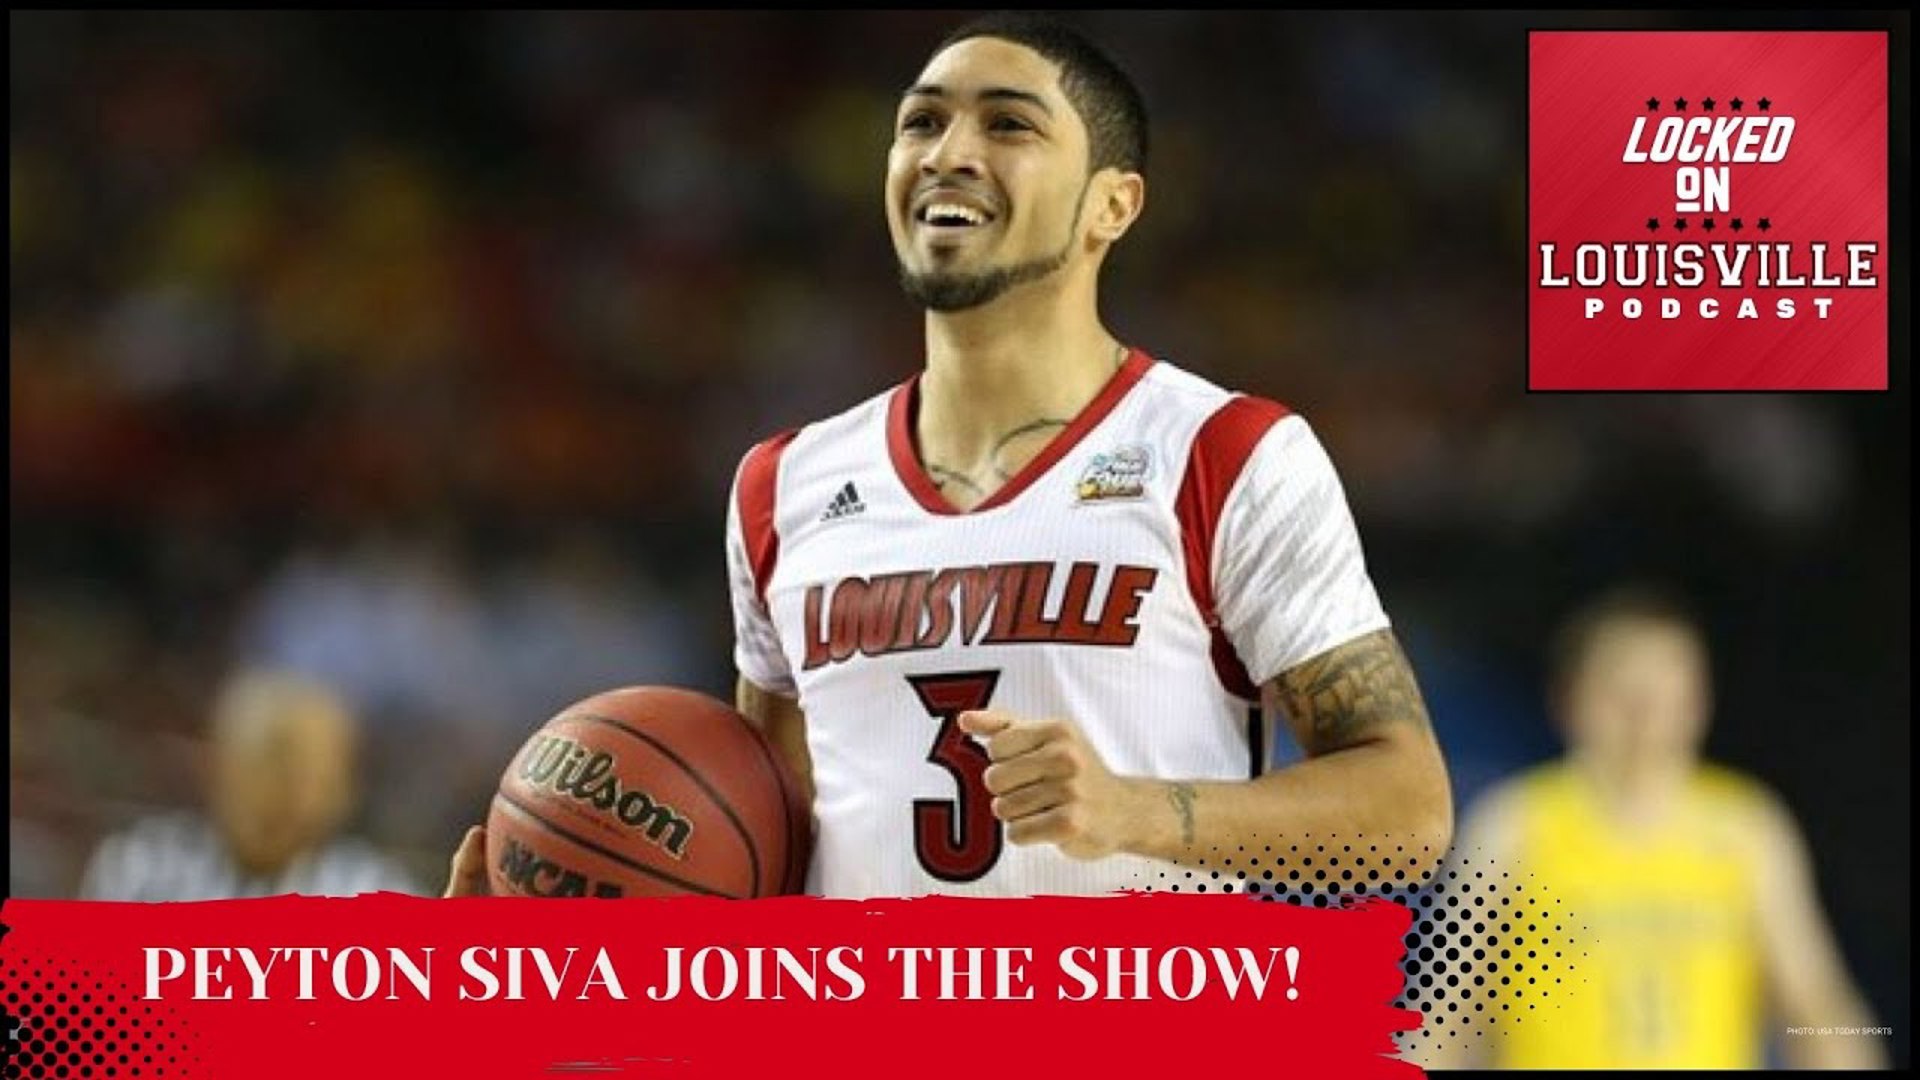 Former Louisville basketball star & 2013 National Champion Peyton Siva joins the show!